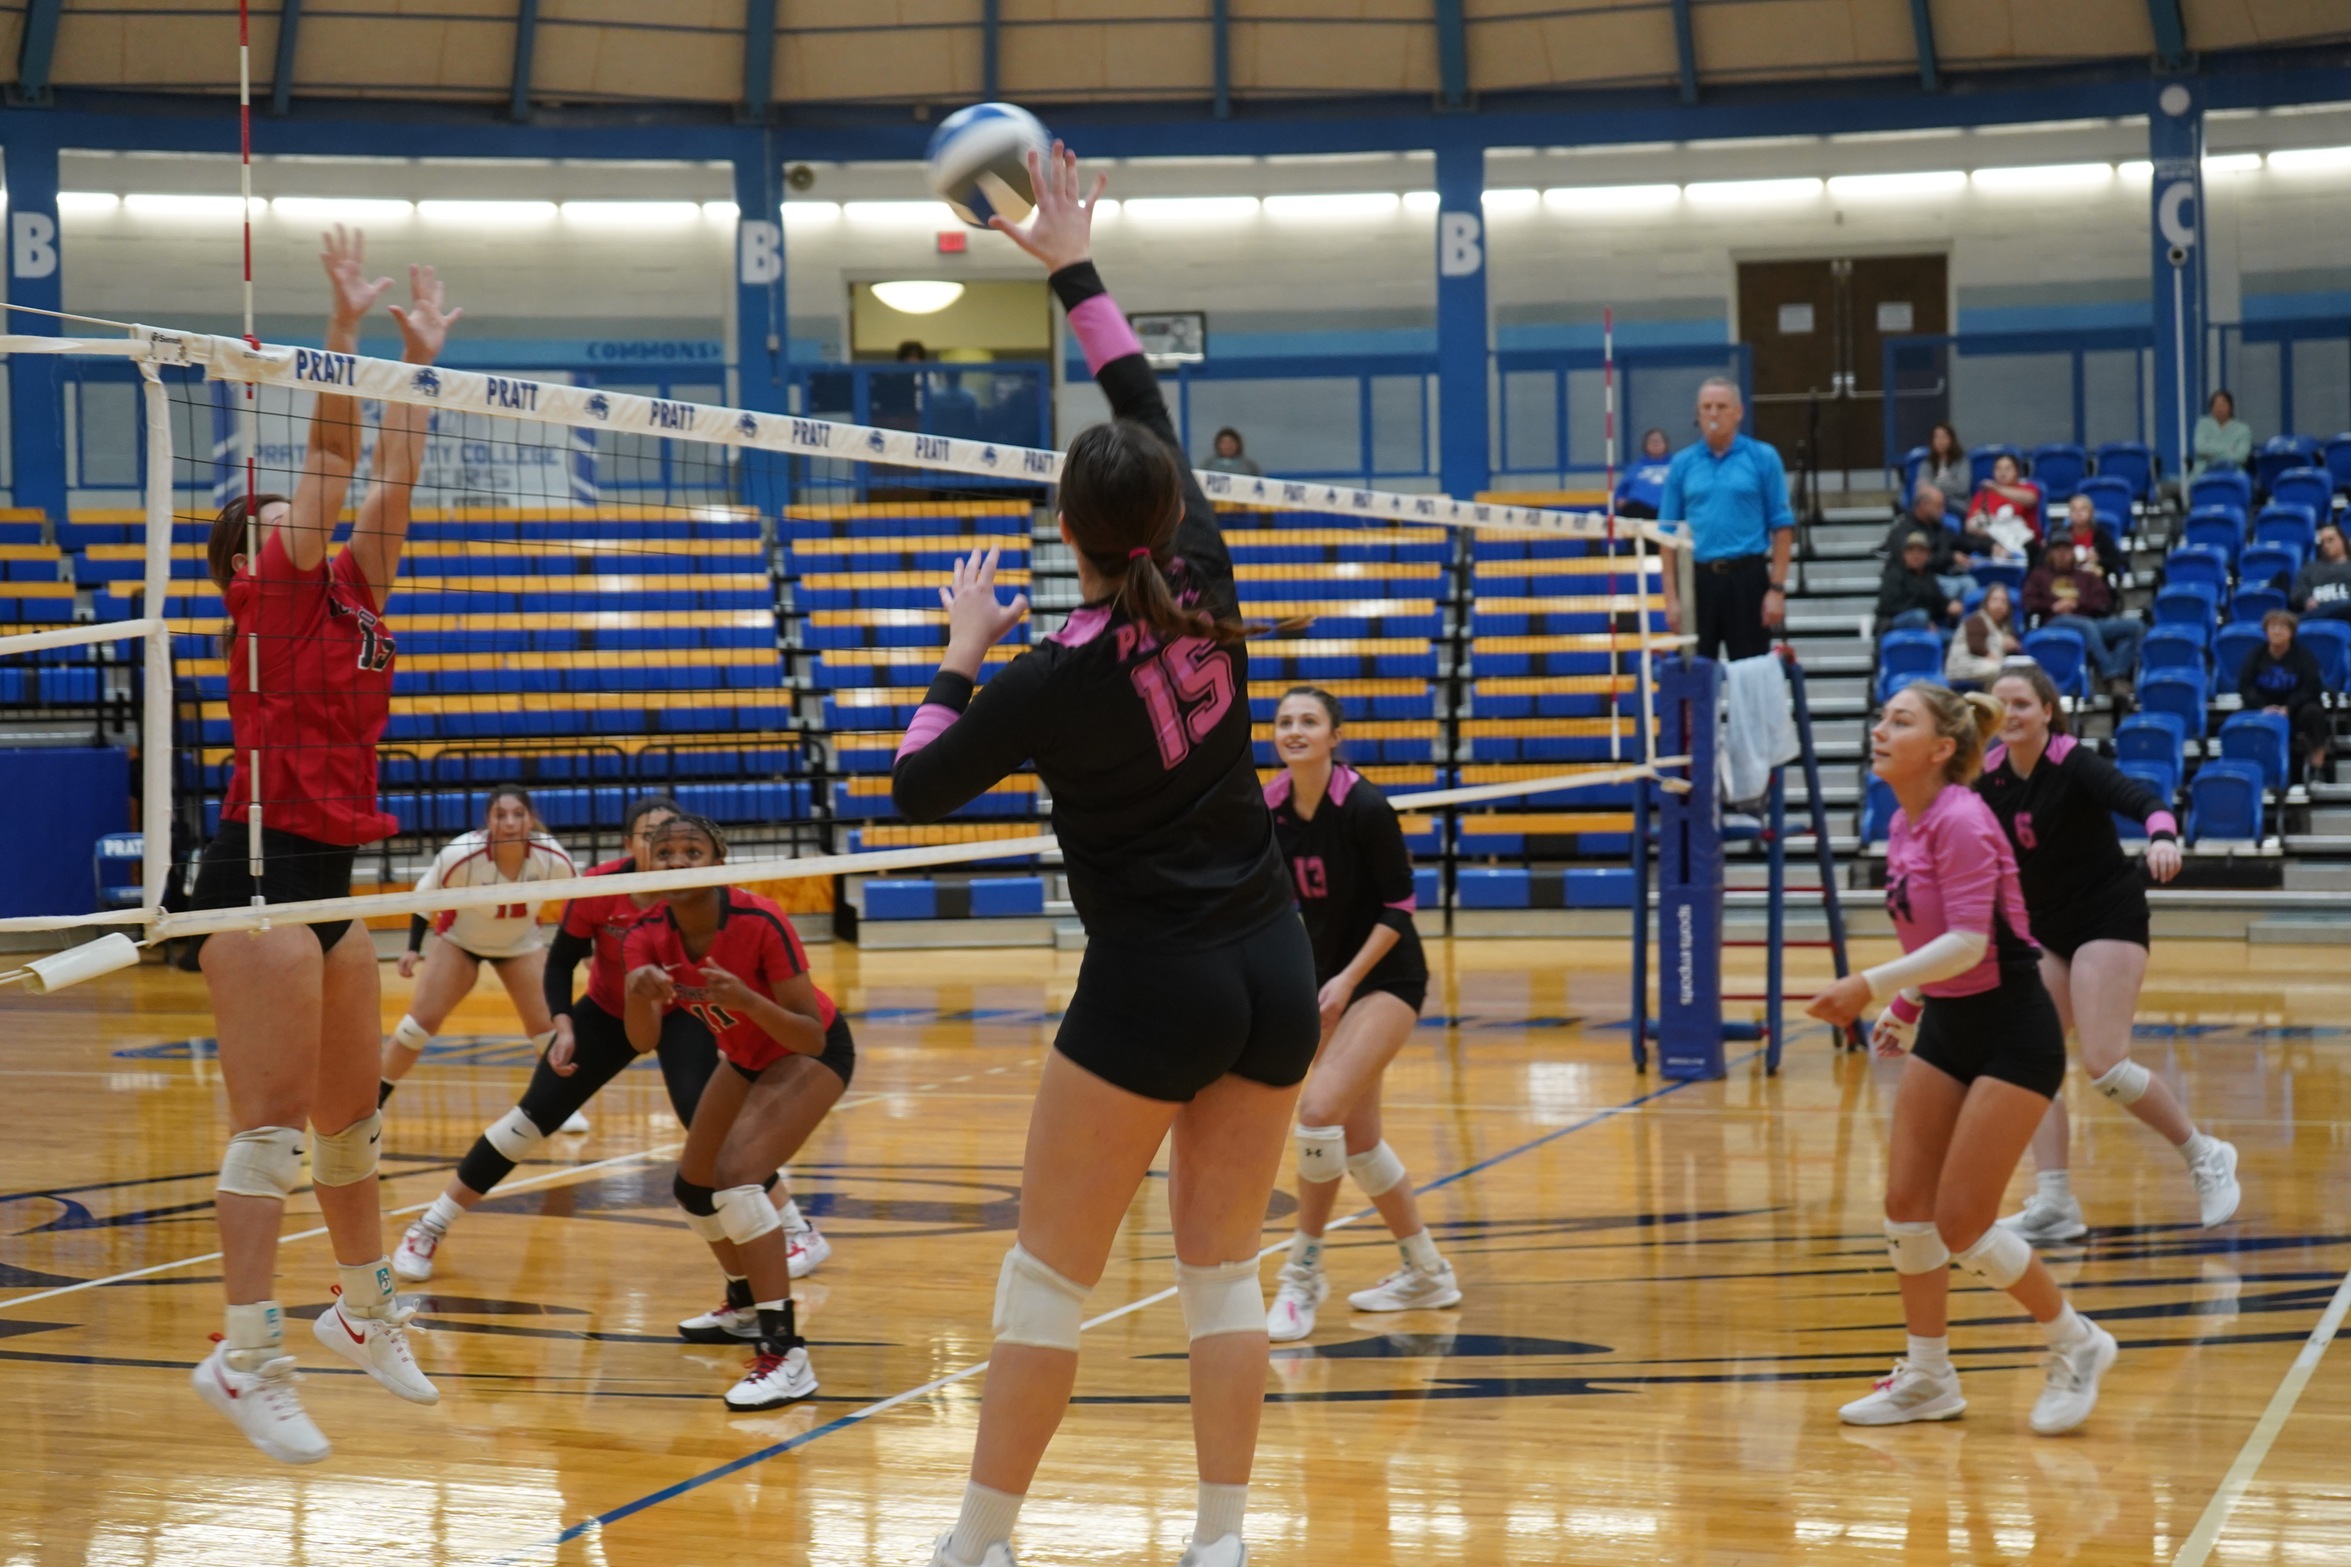 Beaver Volleyball Picked up Two Wins in Monday's Triangular